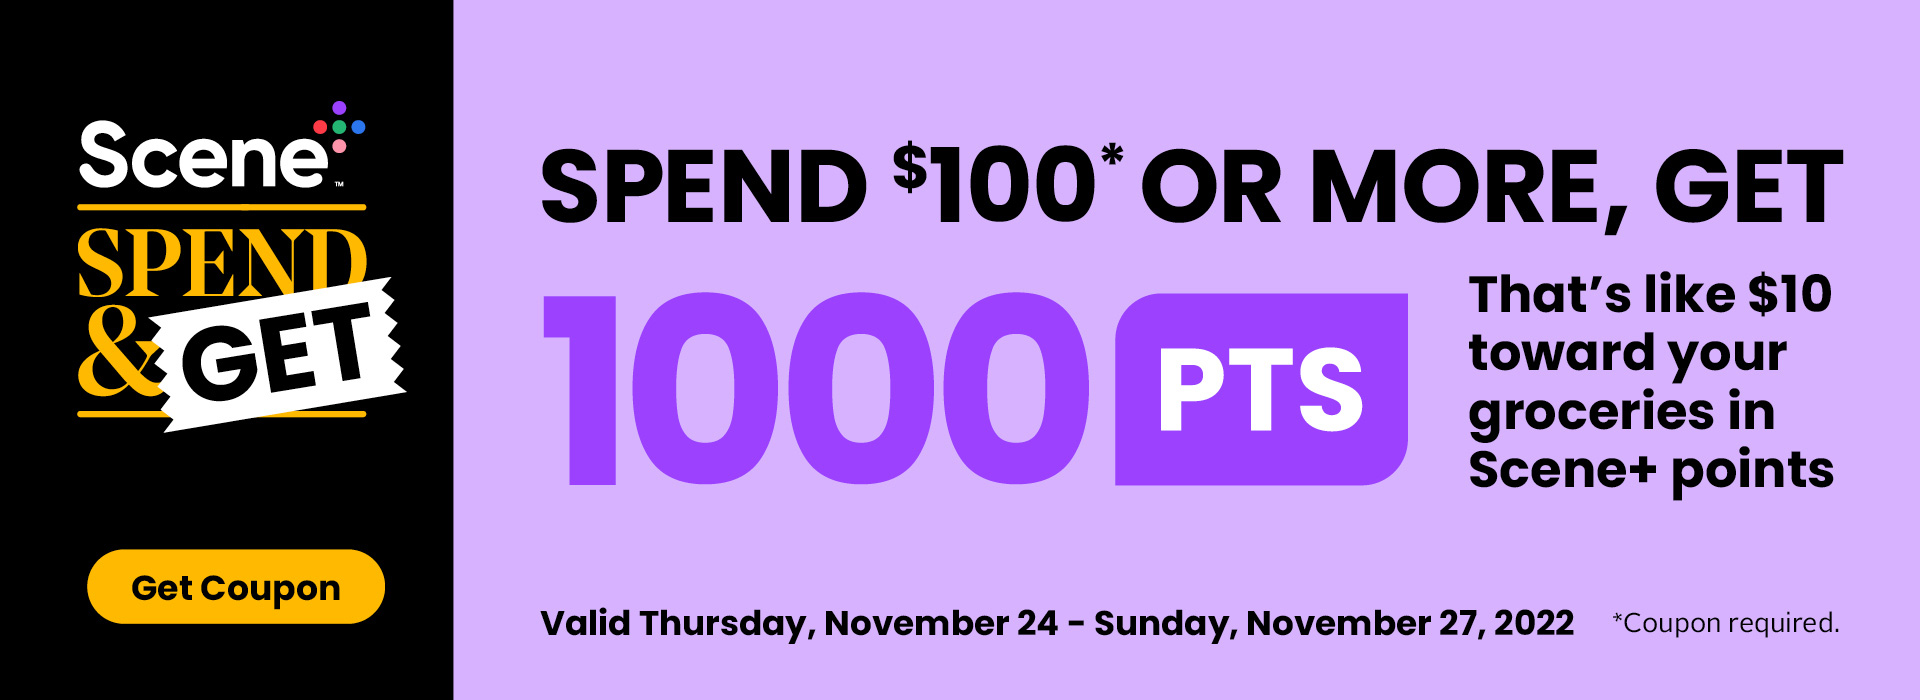 Text Reading 'Scene Plus Spend & Get. Spend $100 or more, get 1000 points. That's like $10 toward your groceries with Scene+ points. Valid from Thursday, November 24 to Sunday, November 27, 2022. Coupon required. 'Get Coupon' by clicking on the button below.'